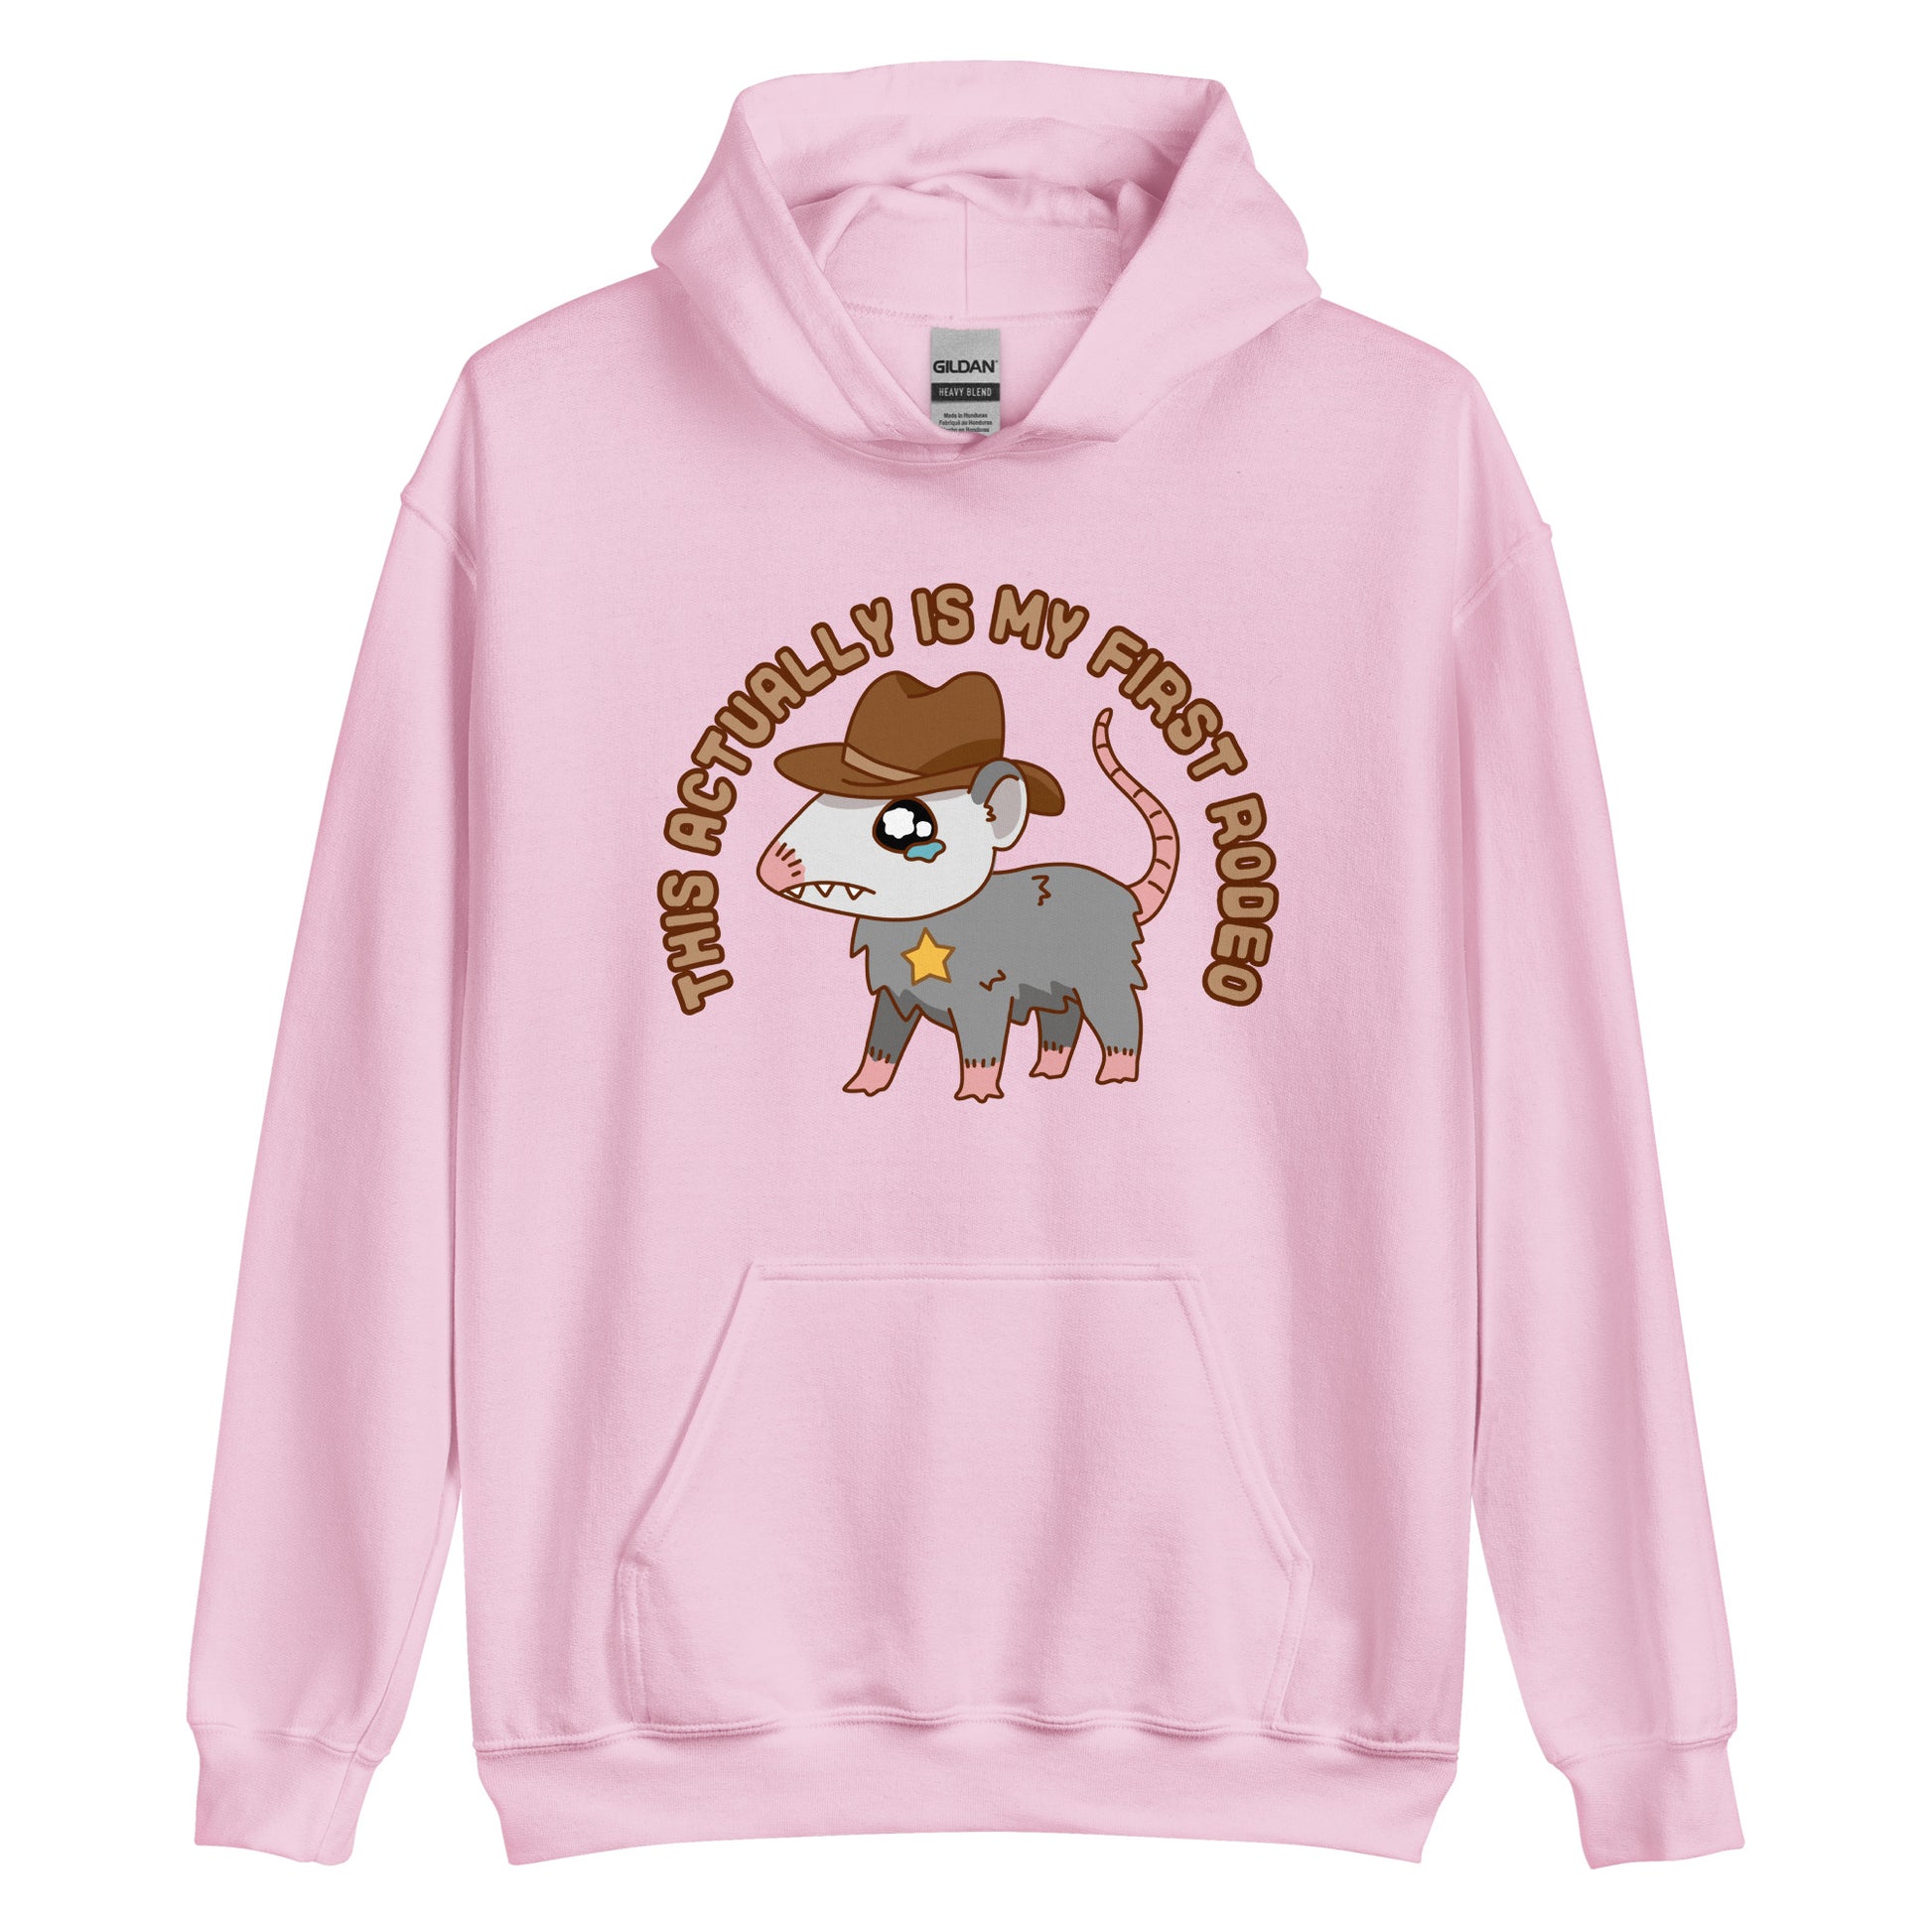 A light pink hooded sweatshirt featuring an illustration of a cute and nervous possum wearing a cowboy hat and sherrif's star badge. Text above the possum in an arc reads "this actually is my first rodeo".